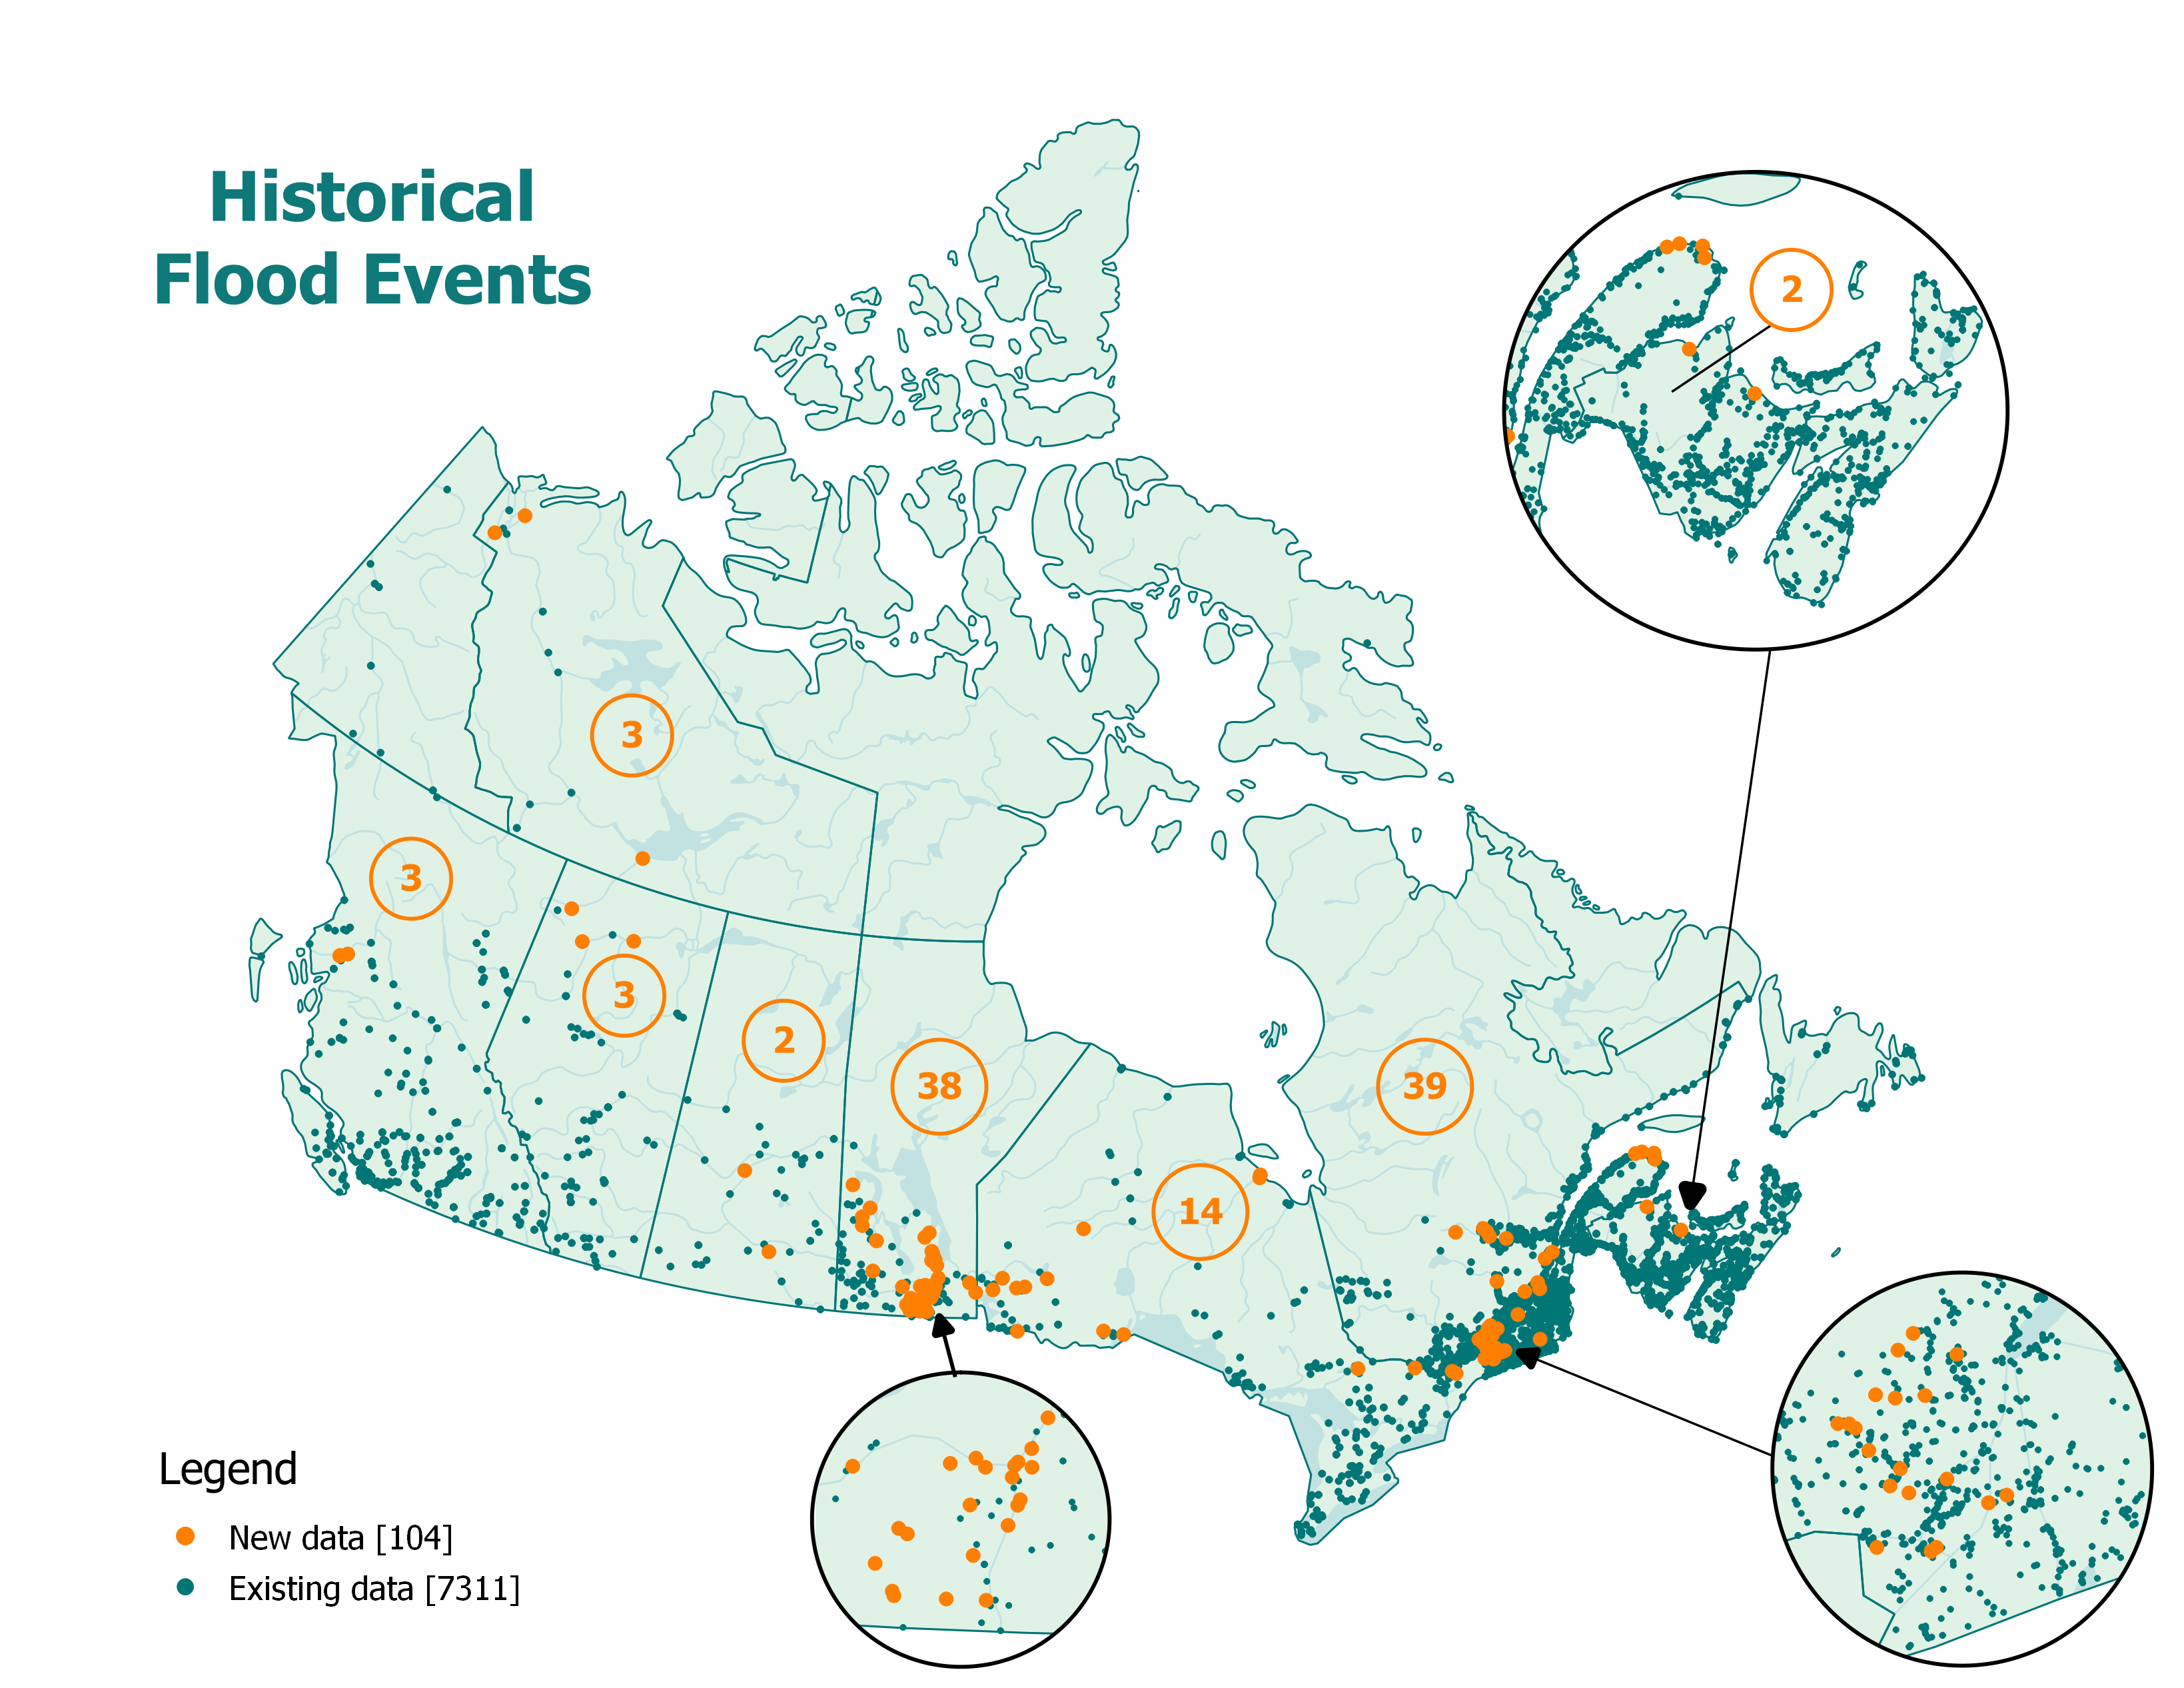 Map of Canada showing data points for historical flood events. The dark points show the 7,311 existing data points, and the 104 orange points show the new data. A total of 2 new events were added in New Brunswick and Saskatchewan, 3 in Alberta, British Columbia and the Northwest Territories, 14 in Ontario, 38 in Manitoba and 39 in Quebec.